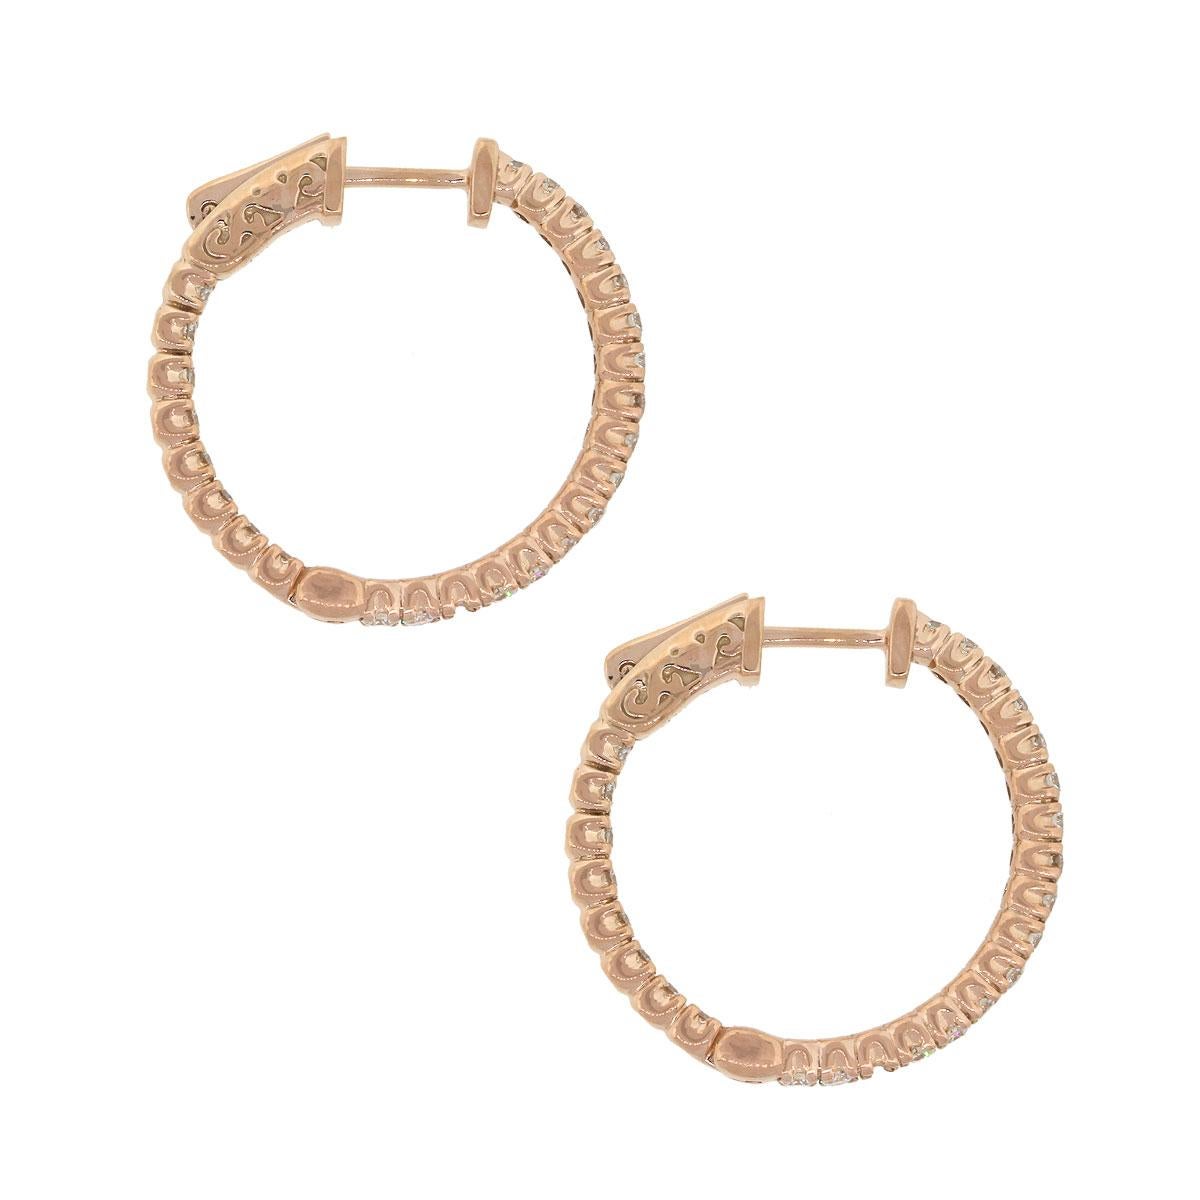 Material: 14k Rose Gold
Style: Diamond Inside Out Hoops
Diamond Details: Approximately 1.19ctw of round brilliant diamonds. Diamonds are G/H in color and SI in clarity.
Earring Measurements: 0.95″ x 0.11″ x 0.95″
Total Weight: 6.3g (4.1dwt)
Earring